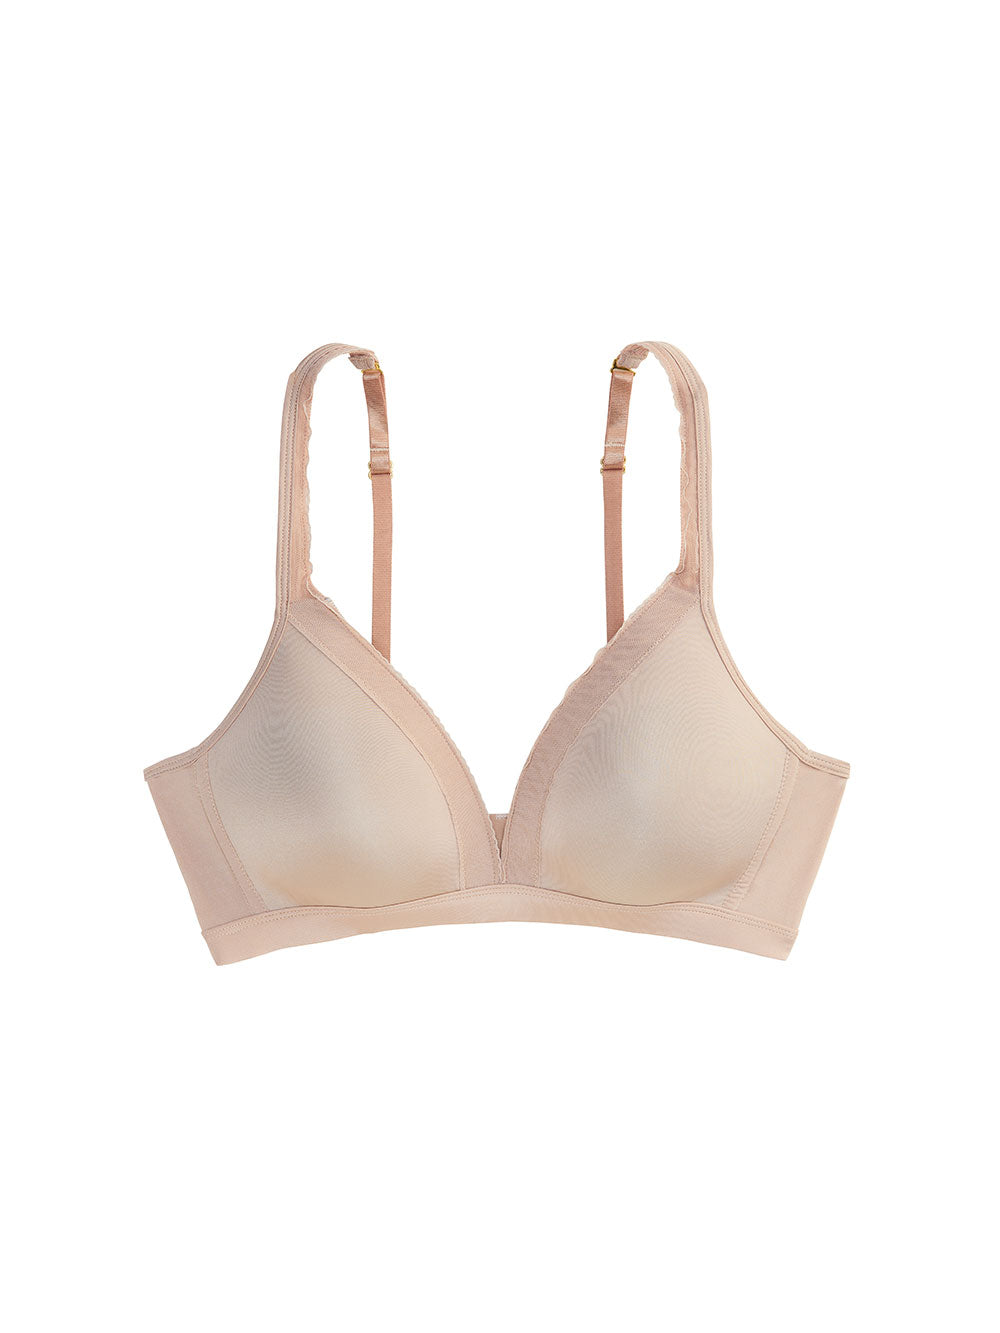 Little Bra Company Meet-and-Greet at Sheer Tomorrow Wednesday 21st